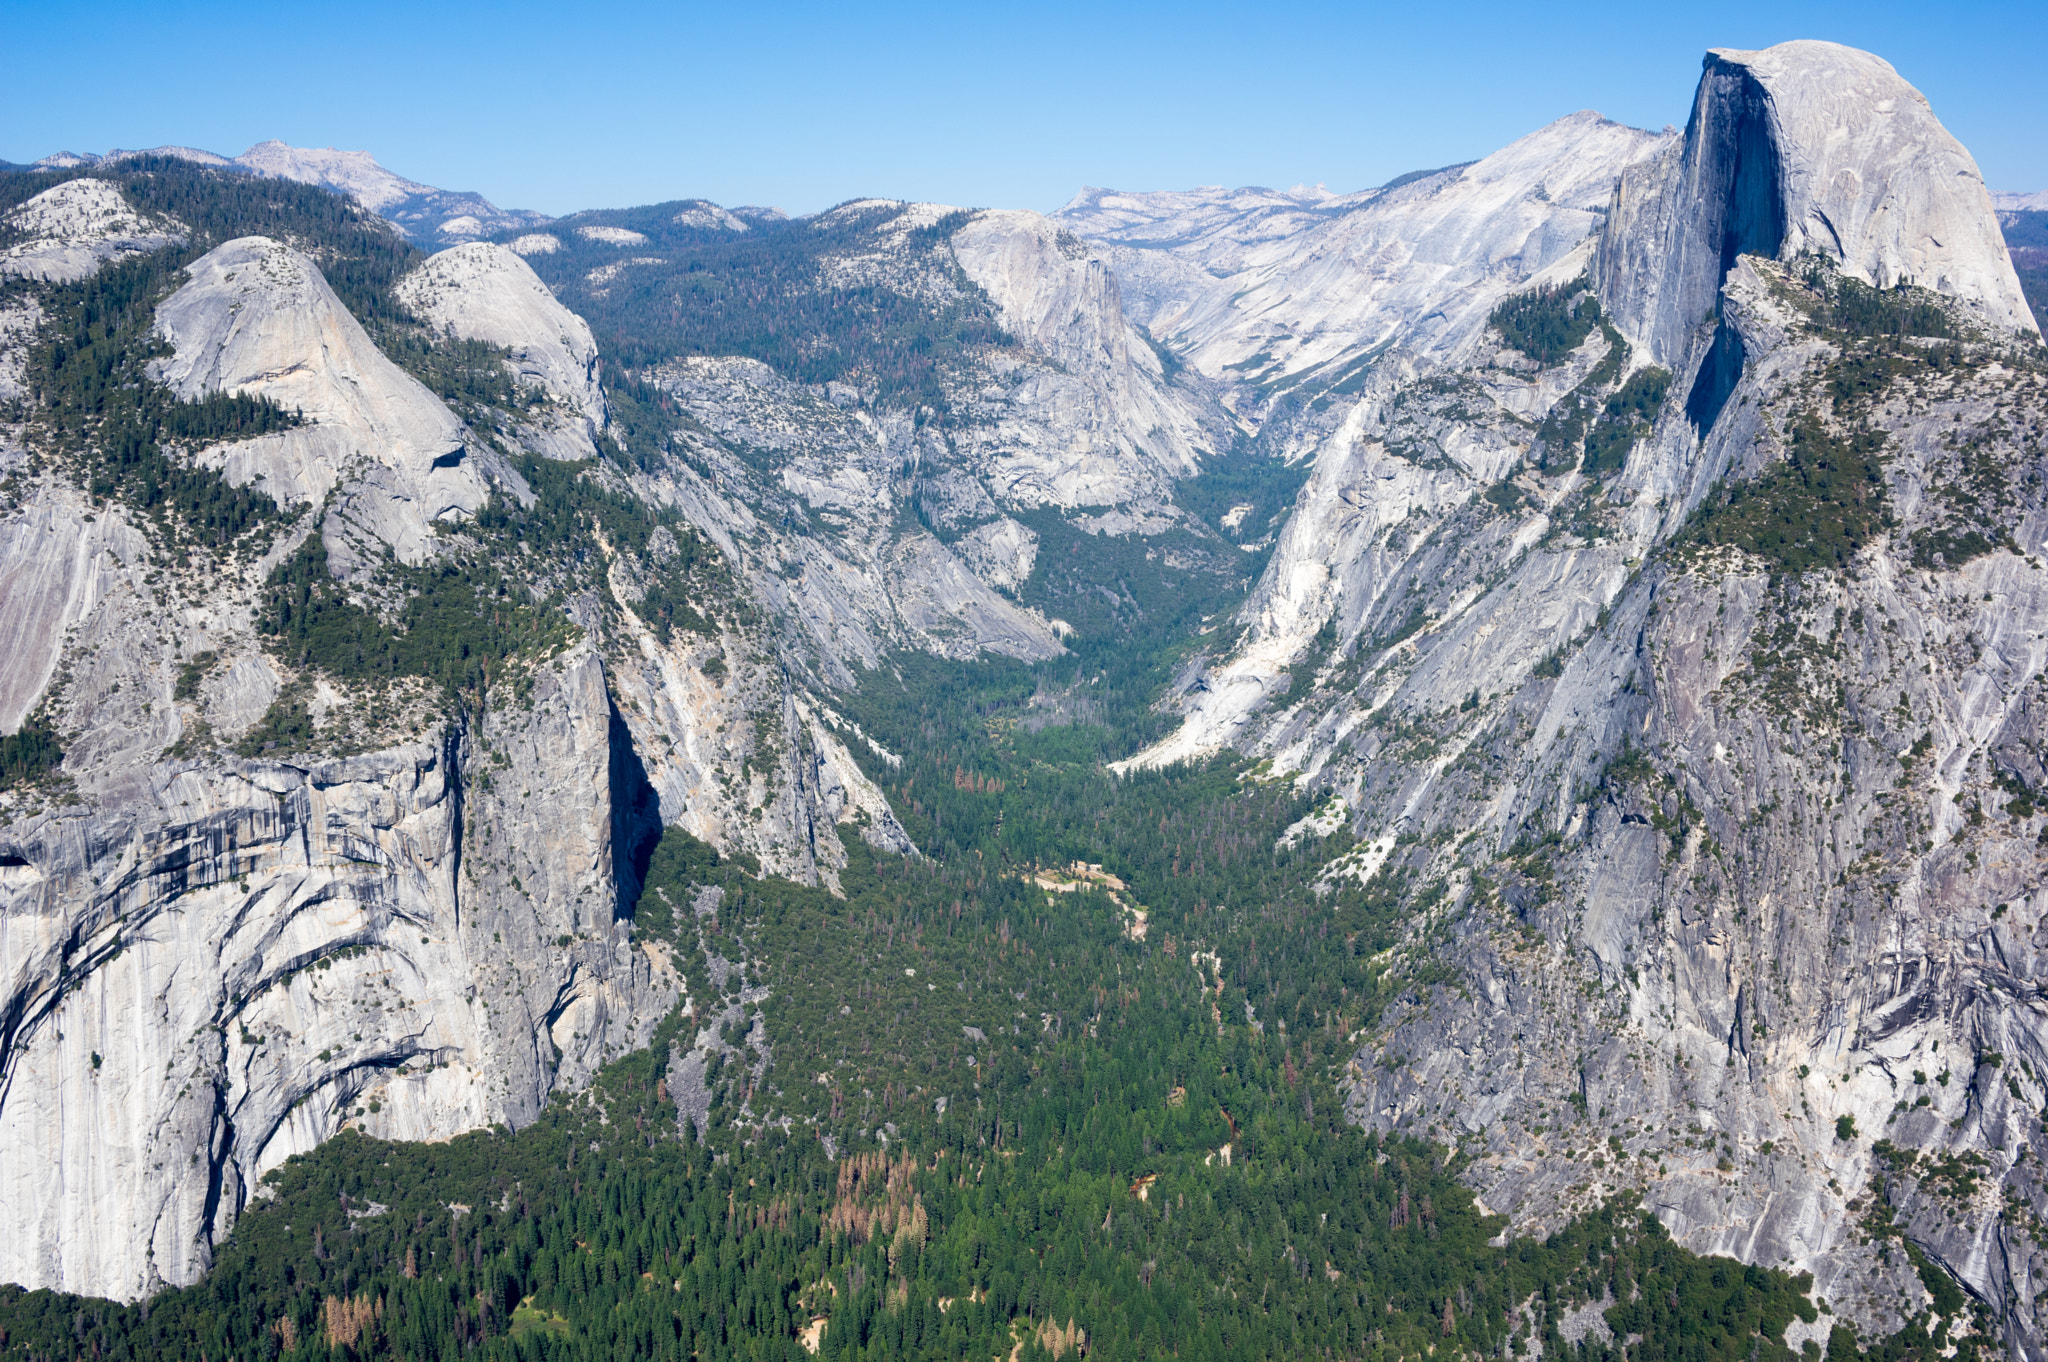 Pentax K-3 II sample photo. Half dome and yosemite valley from glacier point photography